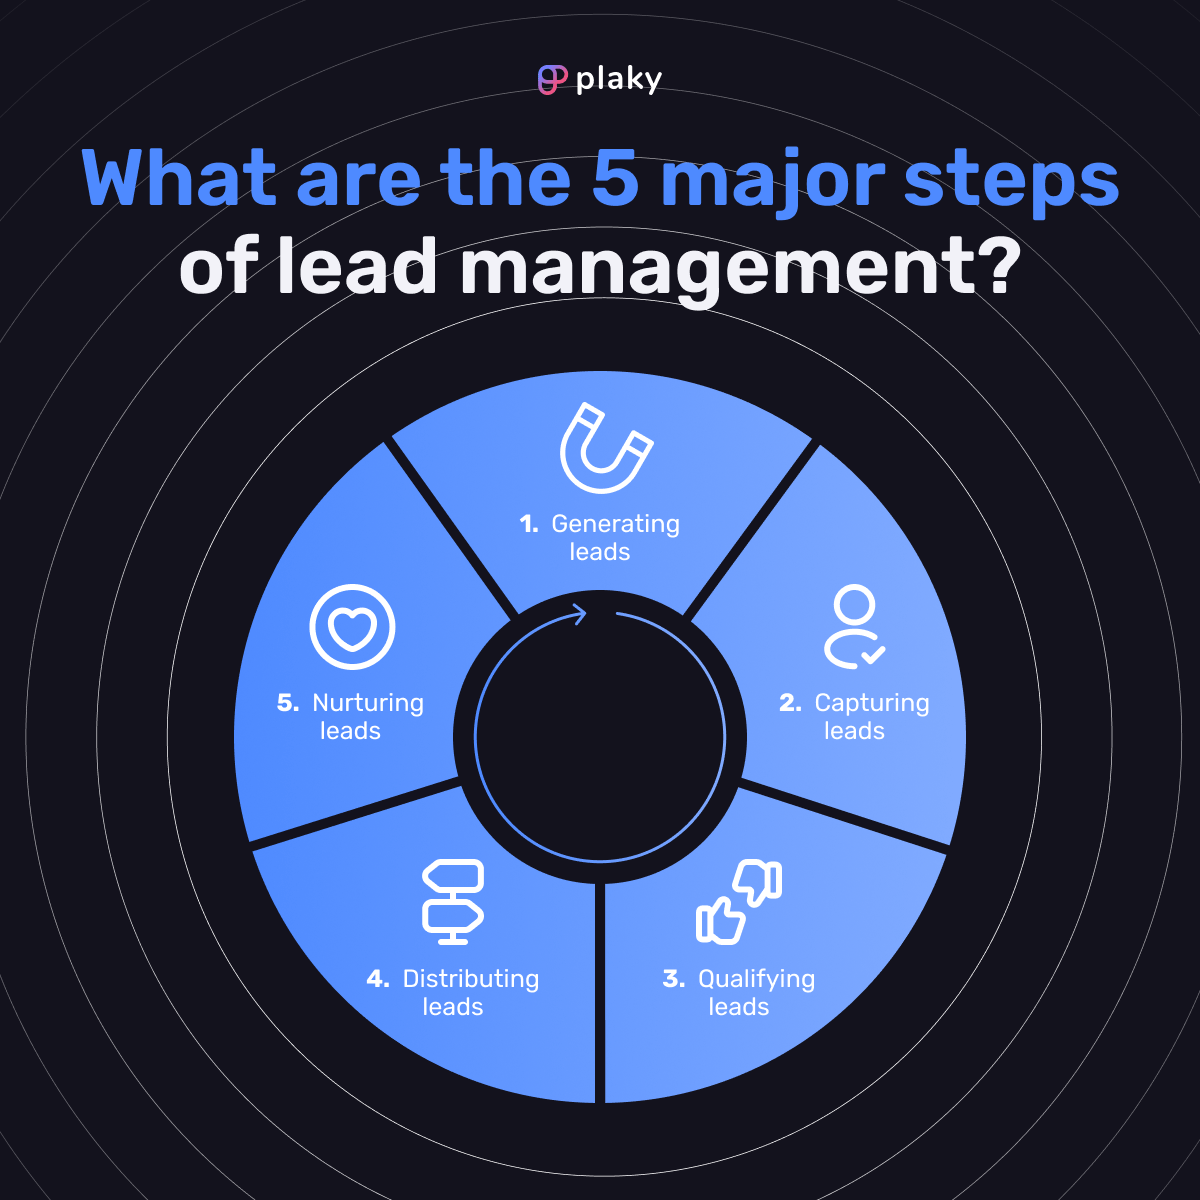 The 5 steps of lead management